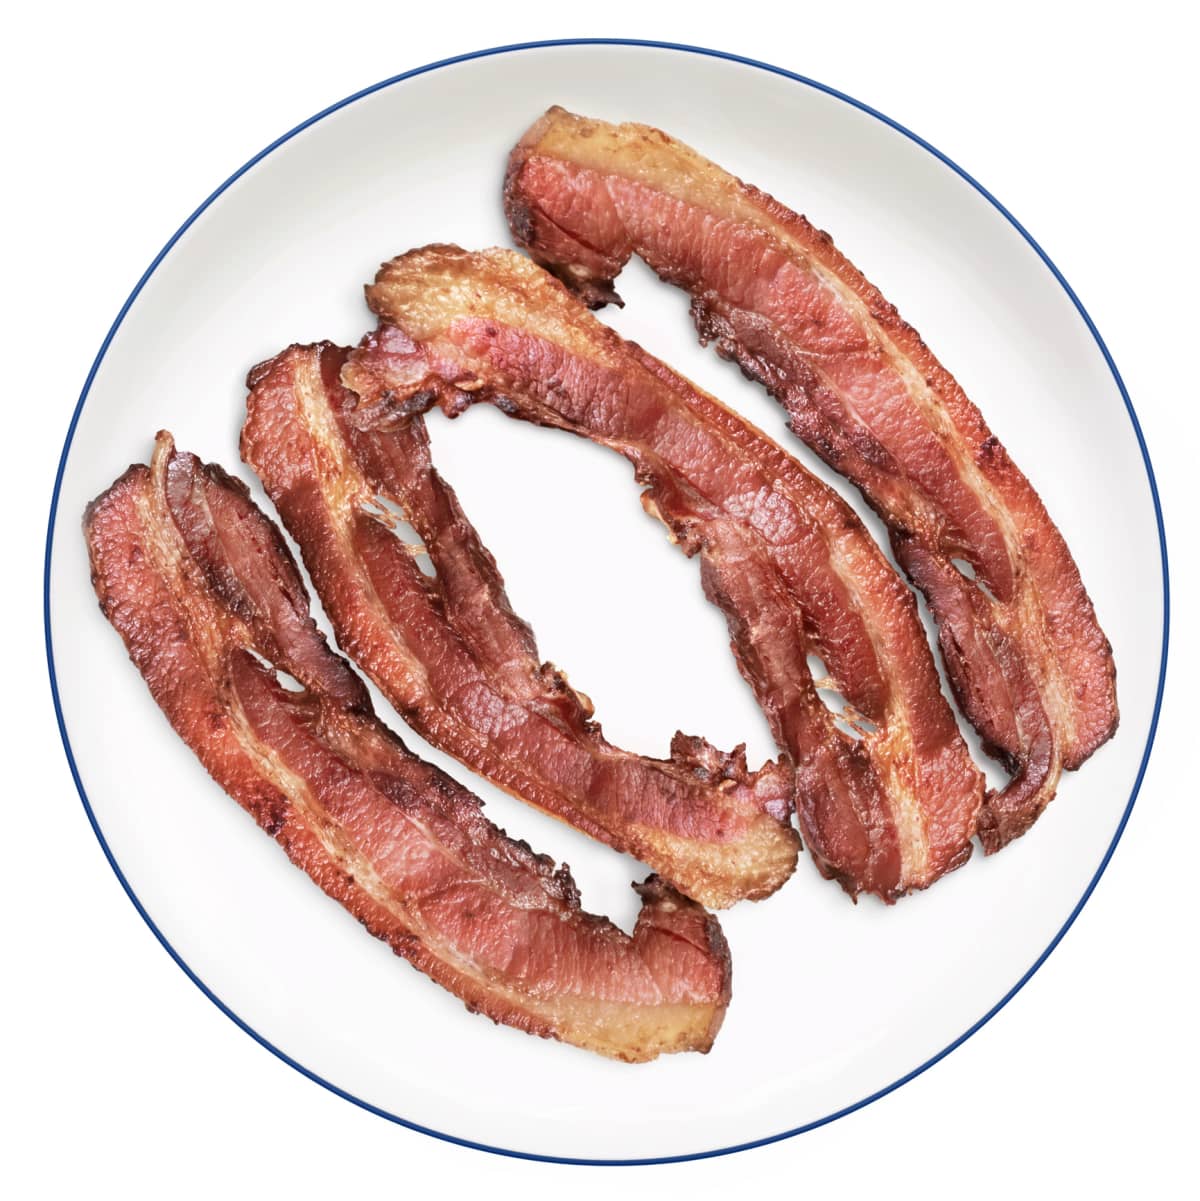 Distinct slices of freshly cooked bacon